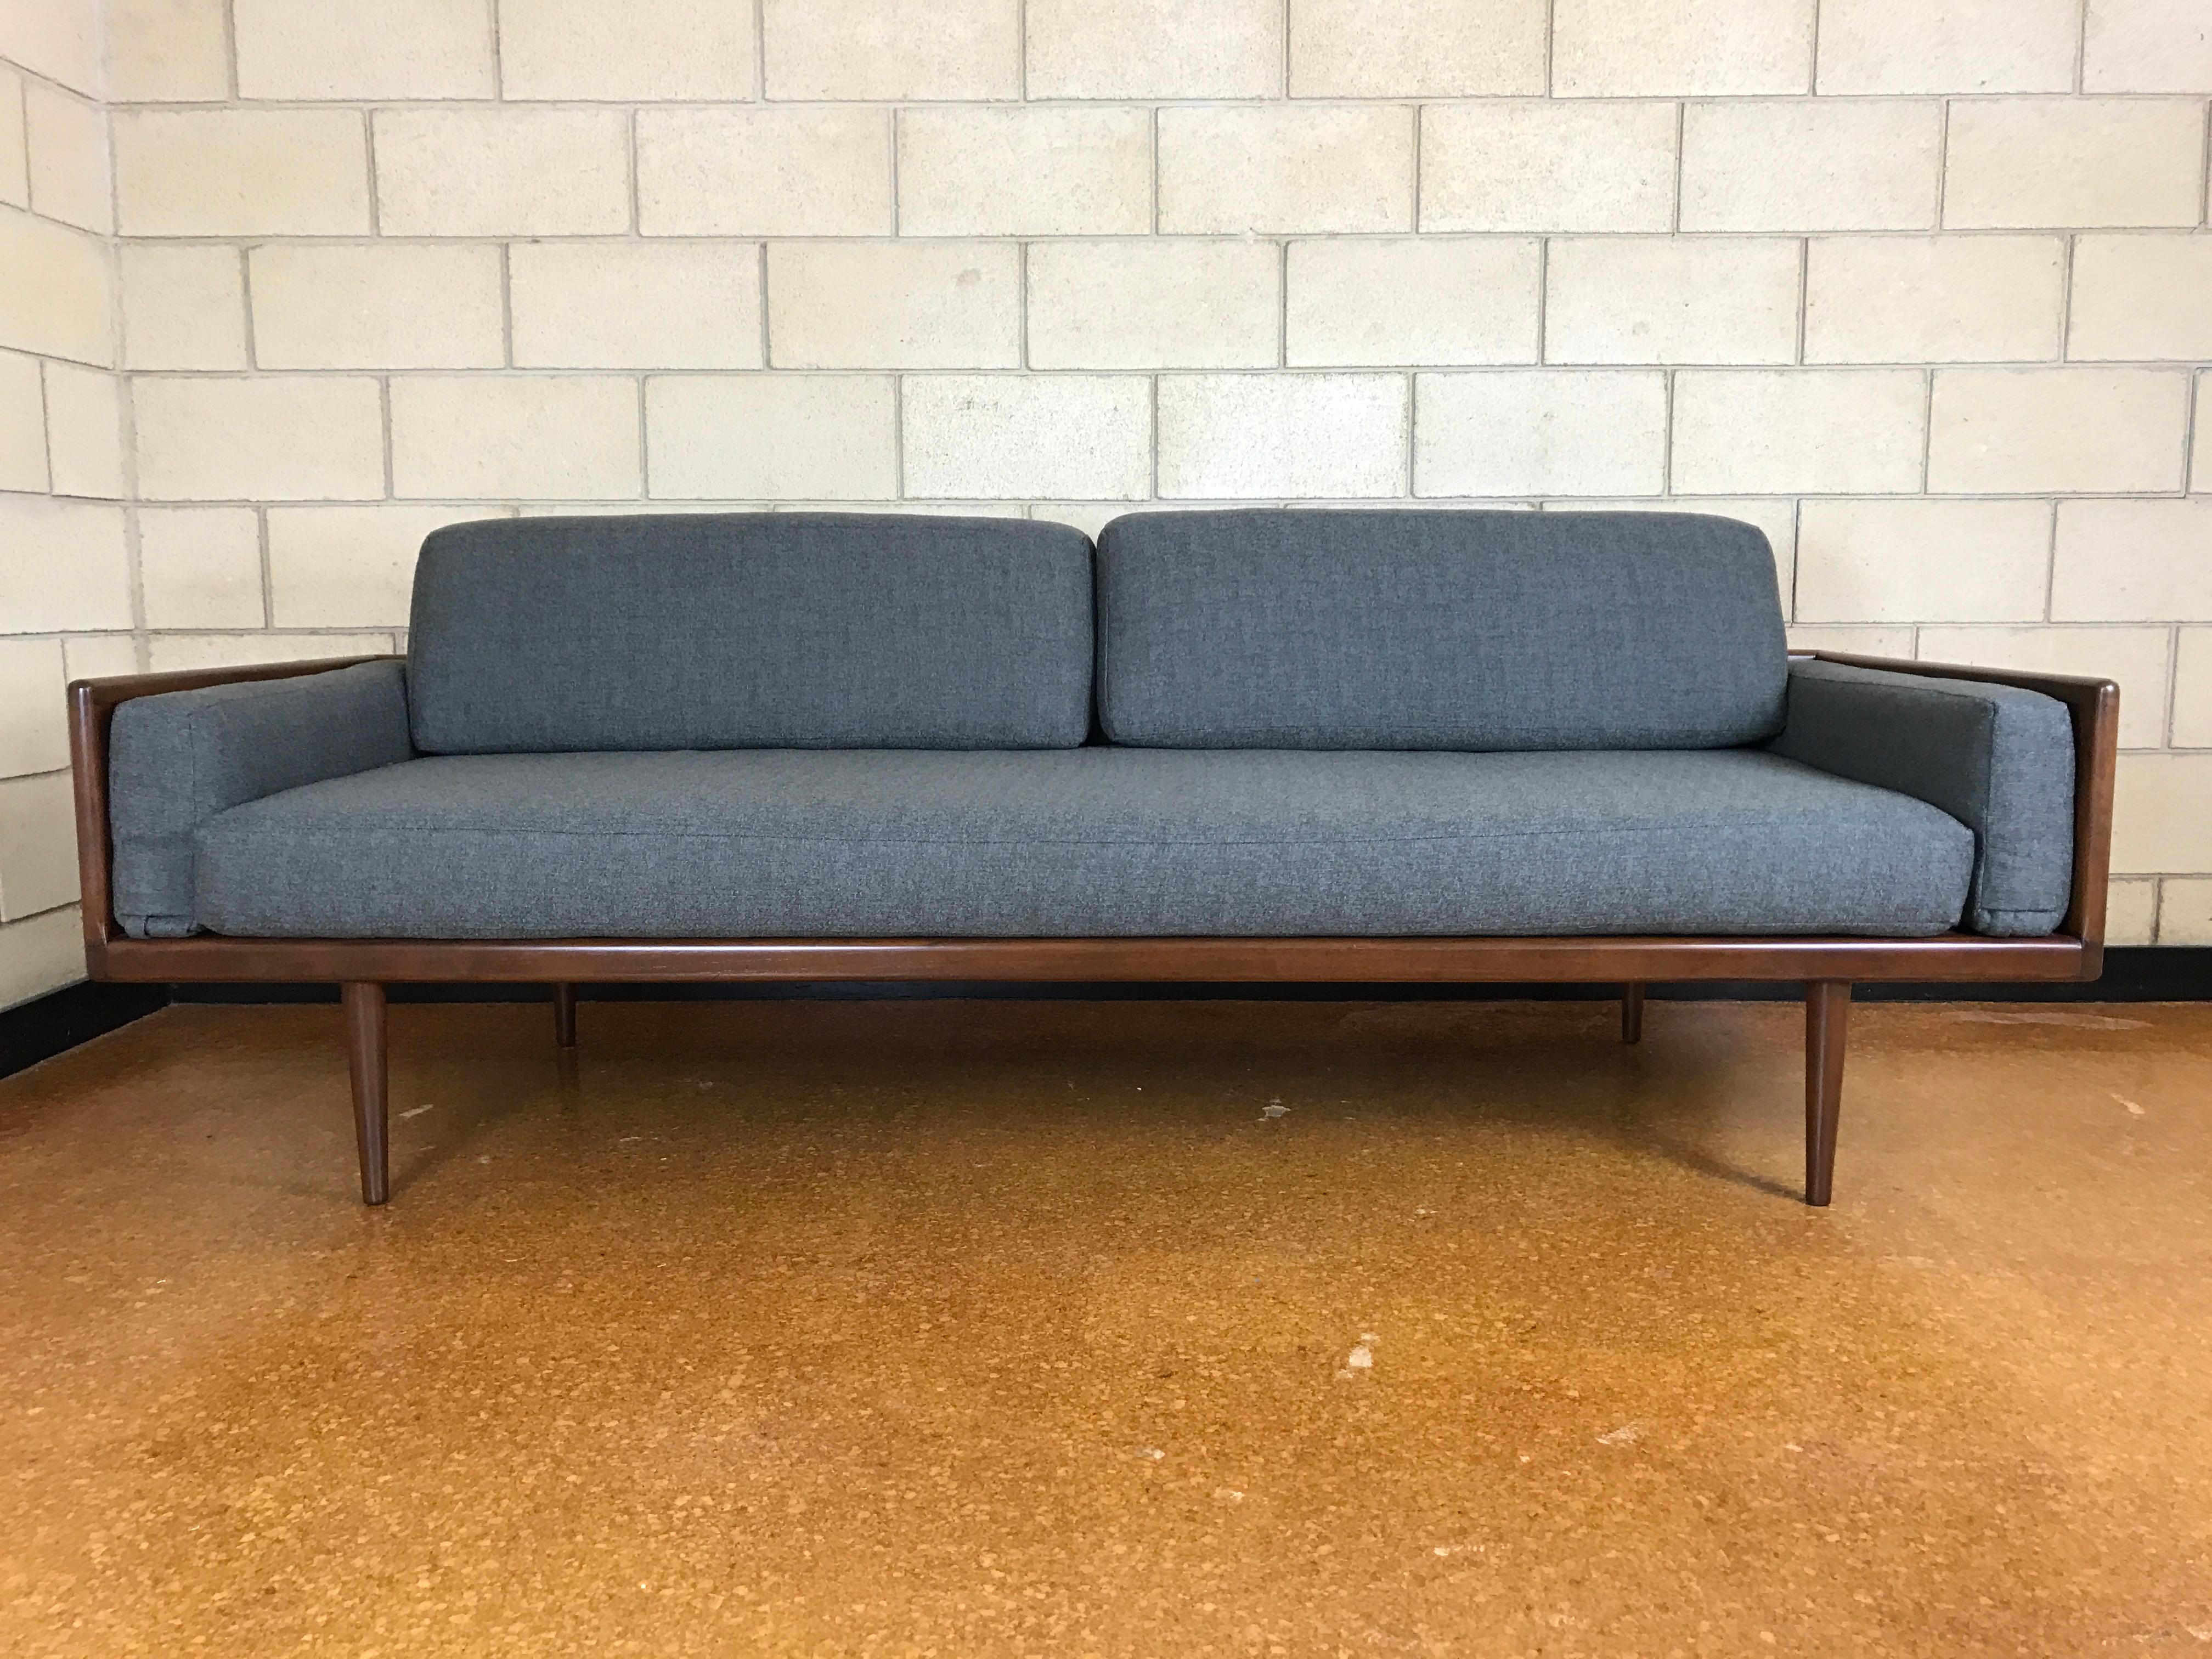 Mid-20th Century Minimalist Sofa and Lounge Chair by Mel Smilow for Smilow-Thielle